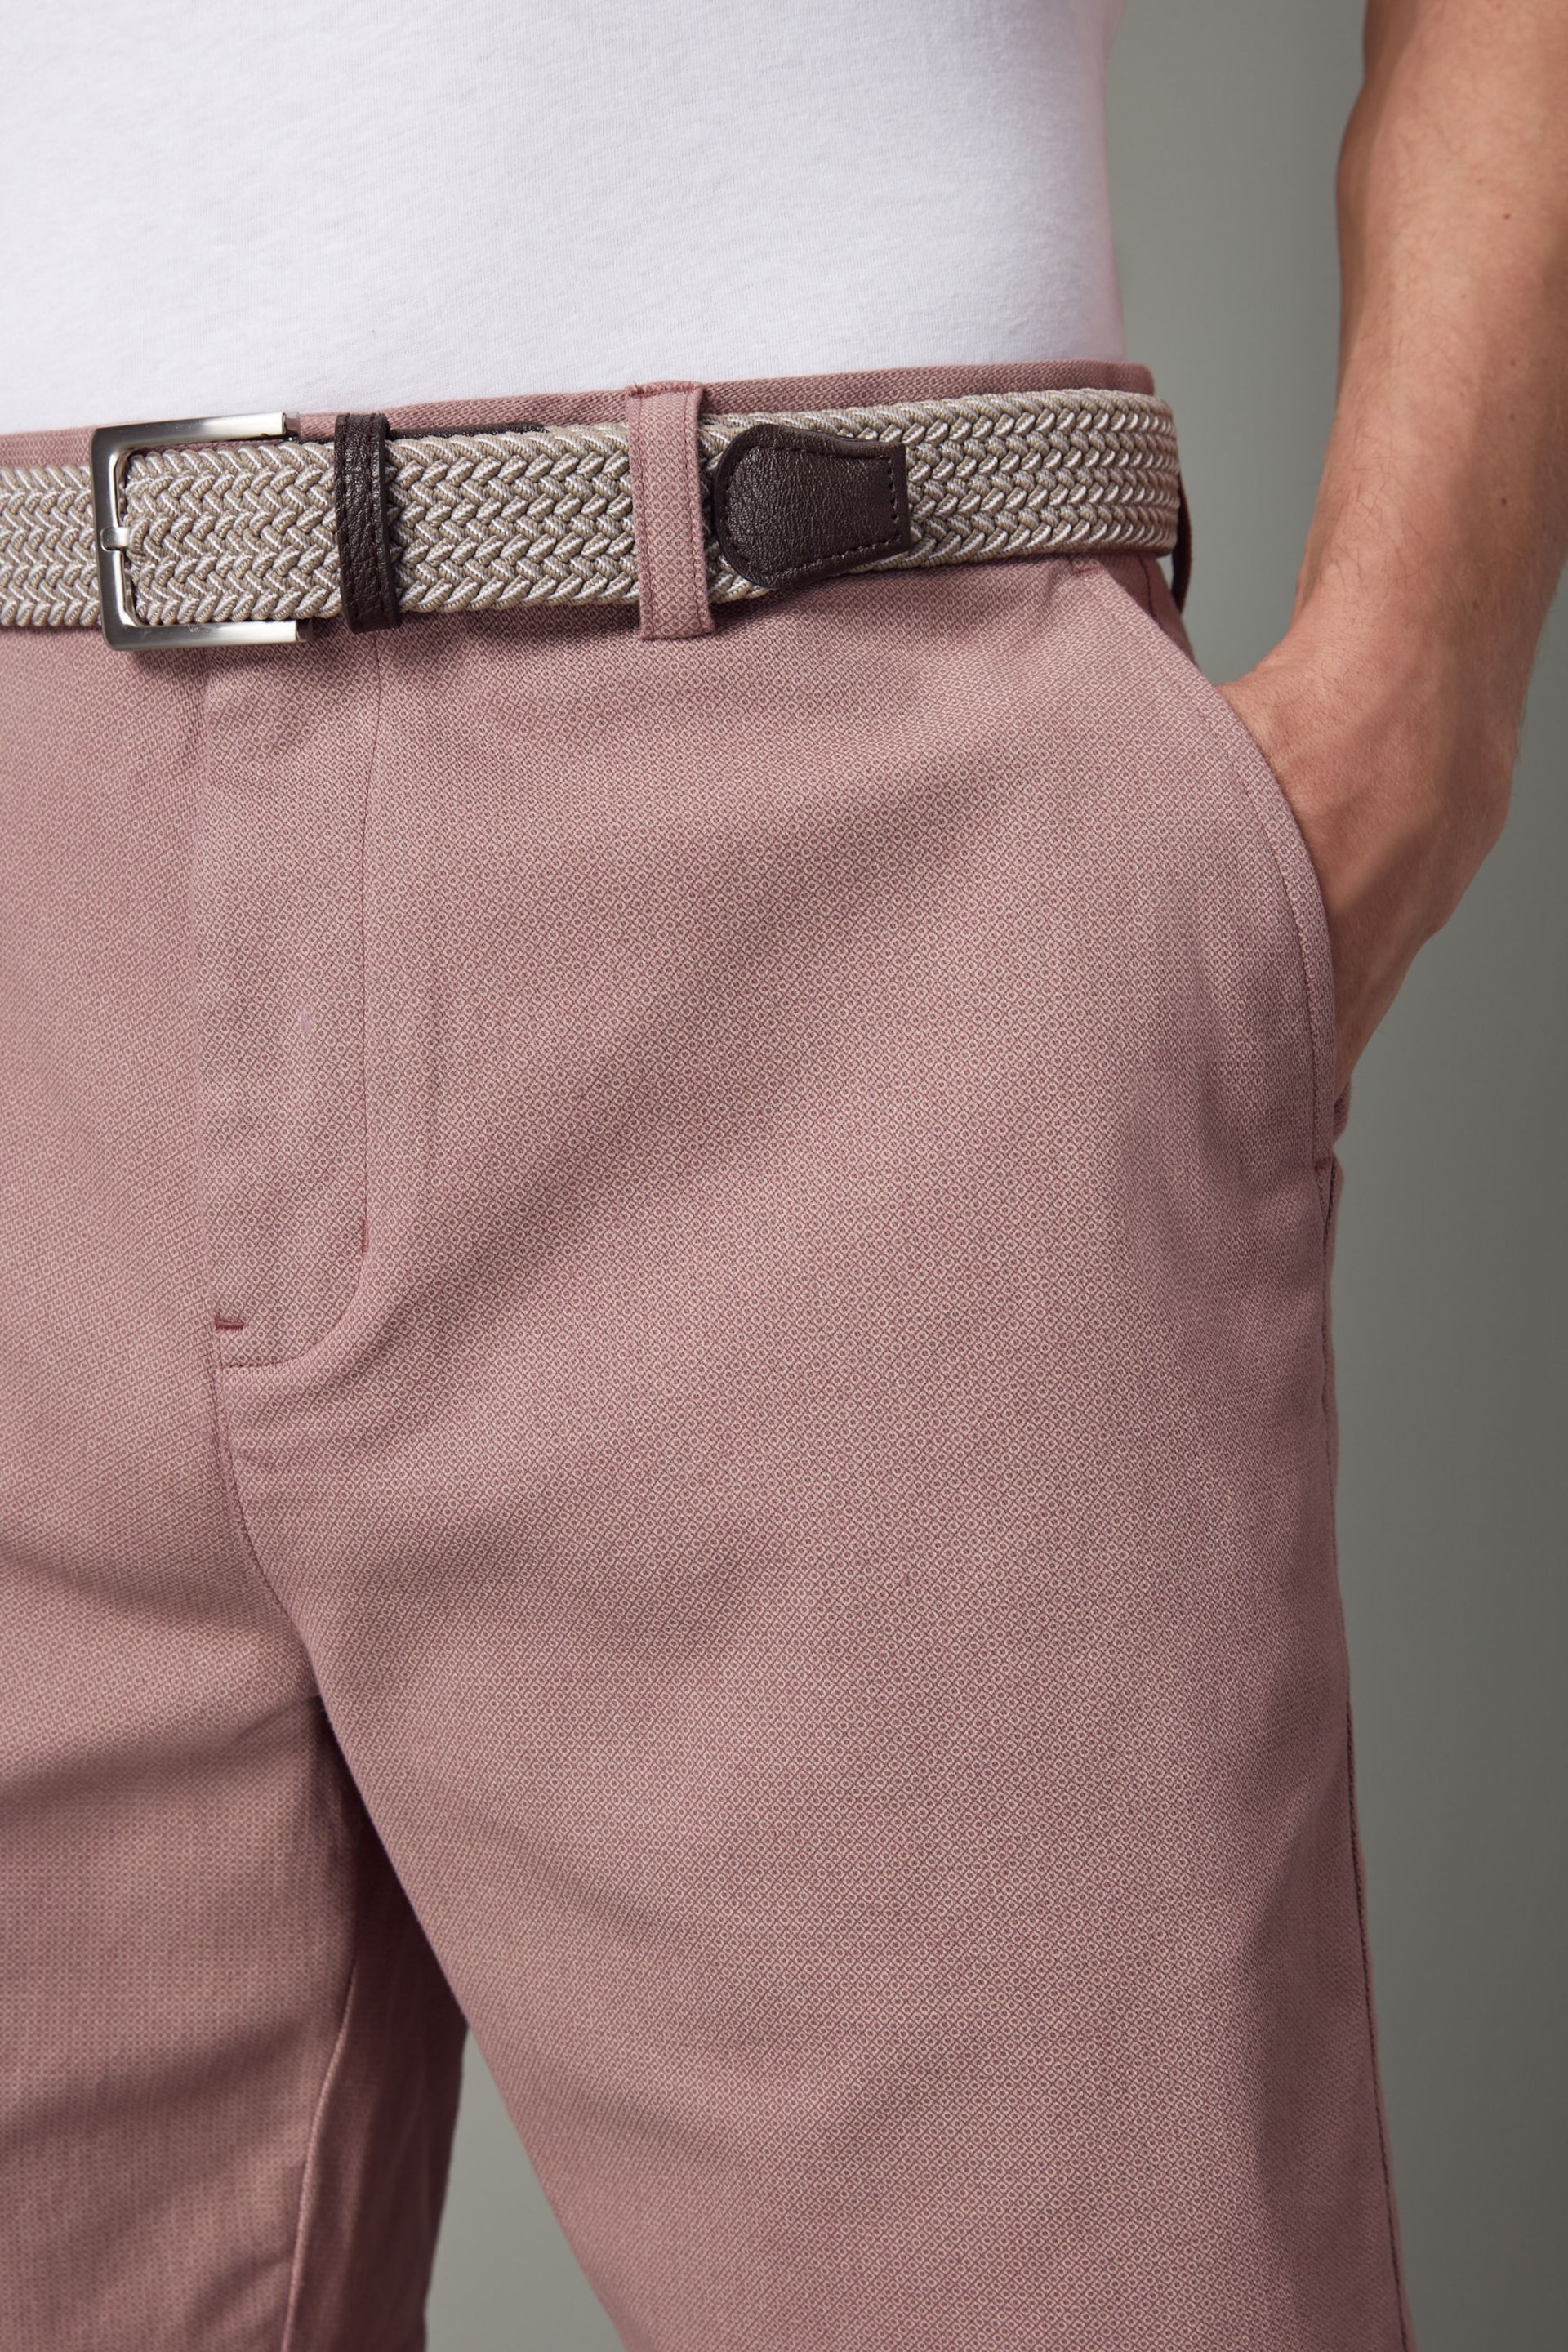 Pink Textured Cotton Blend Chino Shorts with Belt Included - Image 4 of 9